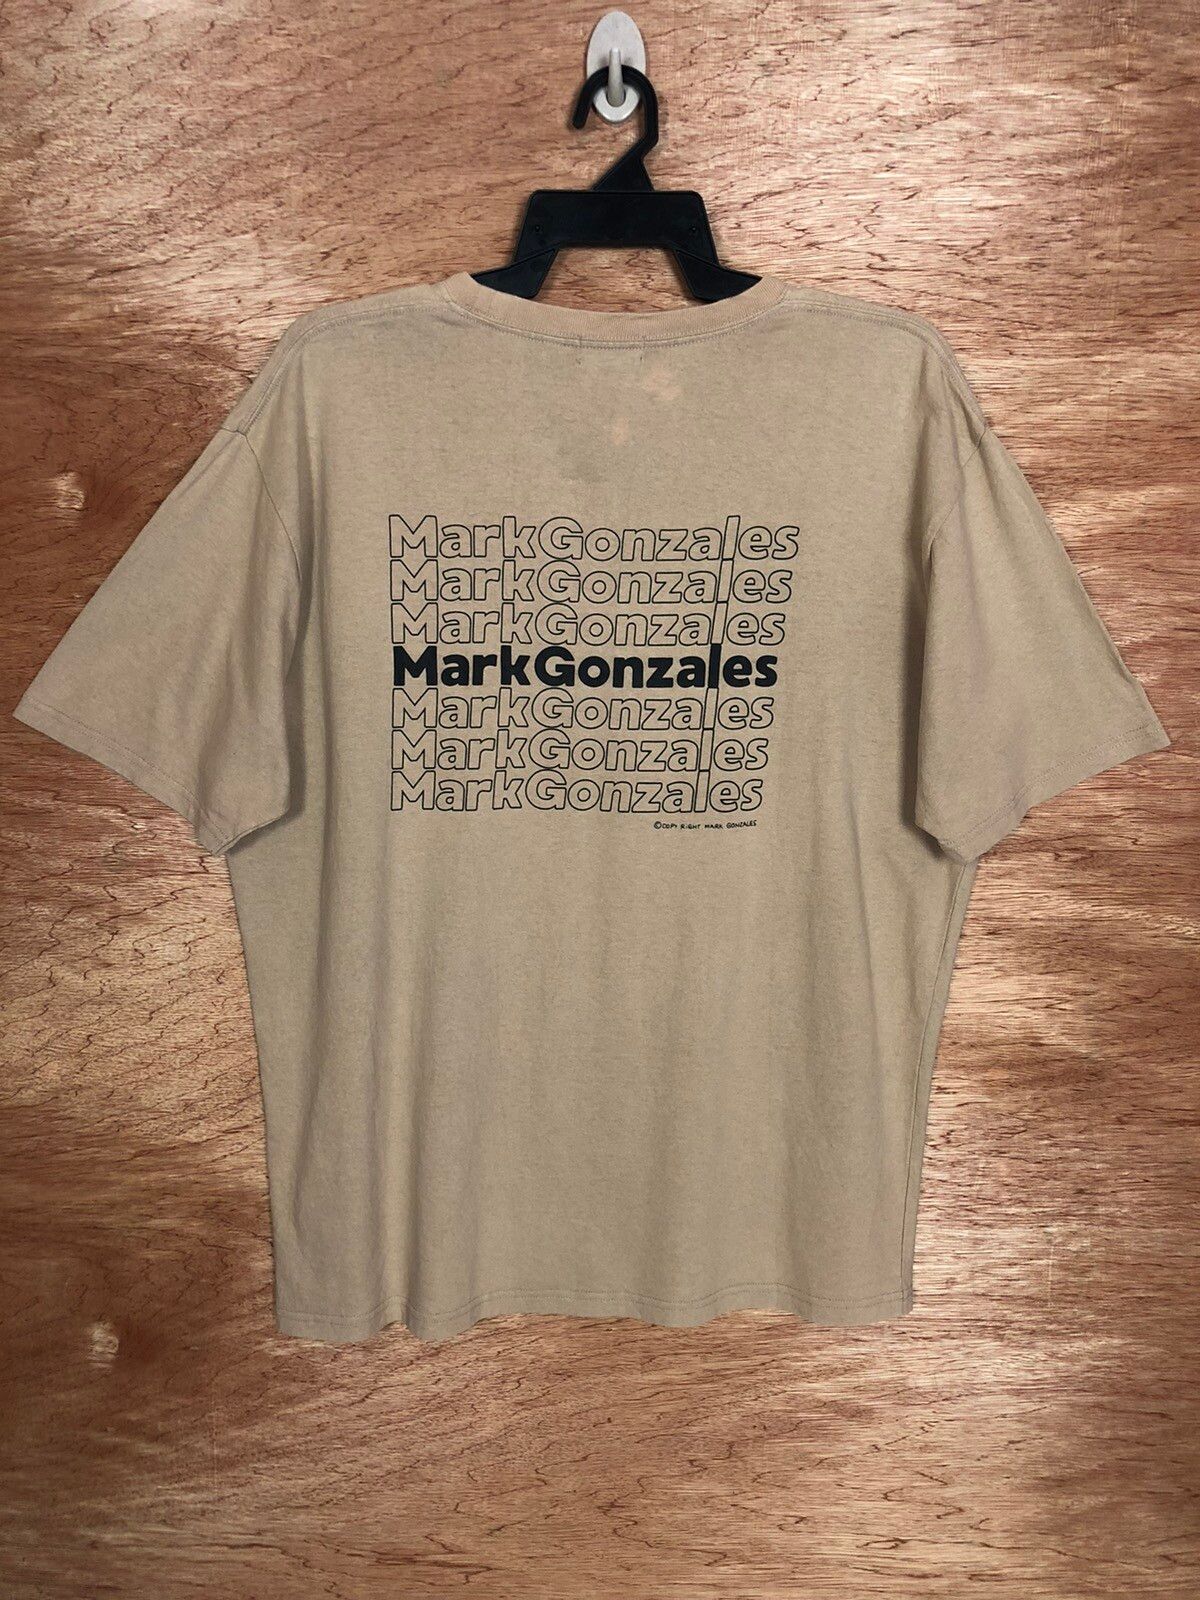 Japanese Brand Mark Gonzales With Antiqulothes Overprint Design Size US L / EU 52-54 / 3 - 1 Preview